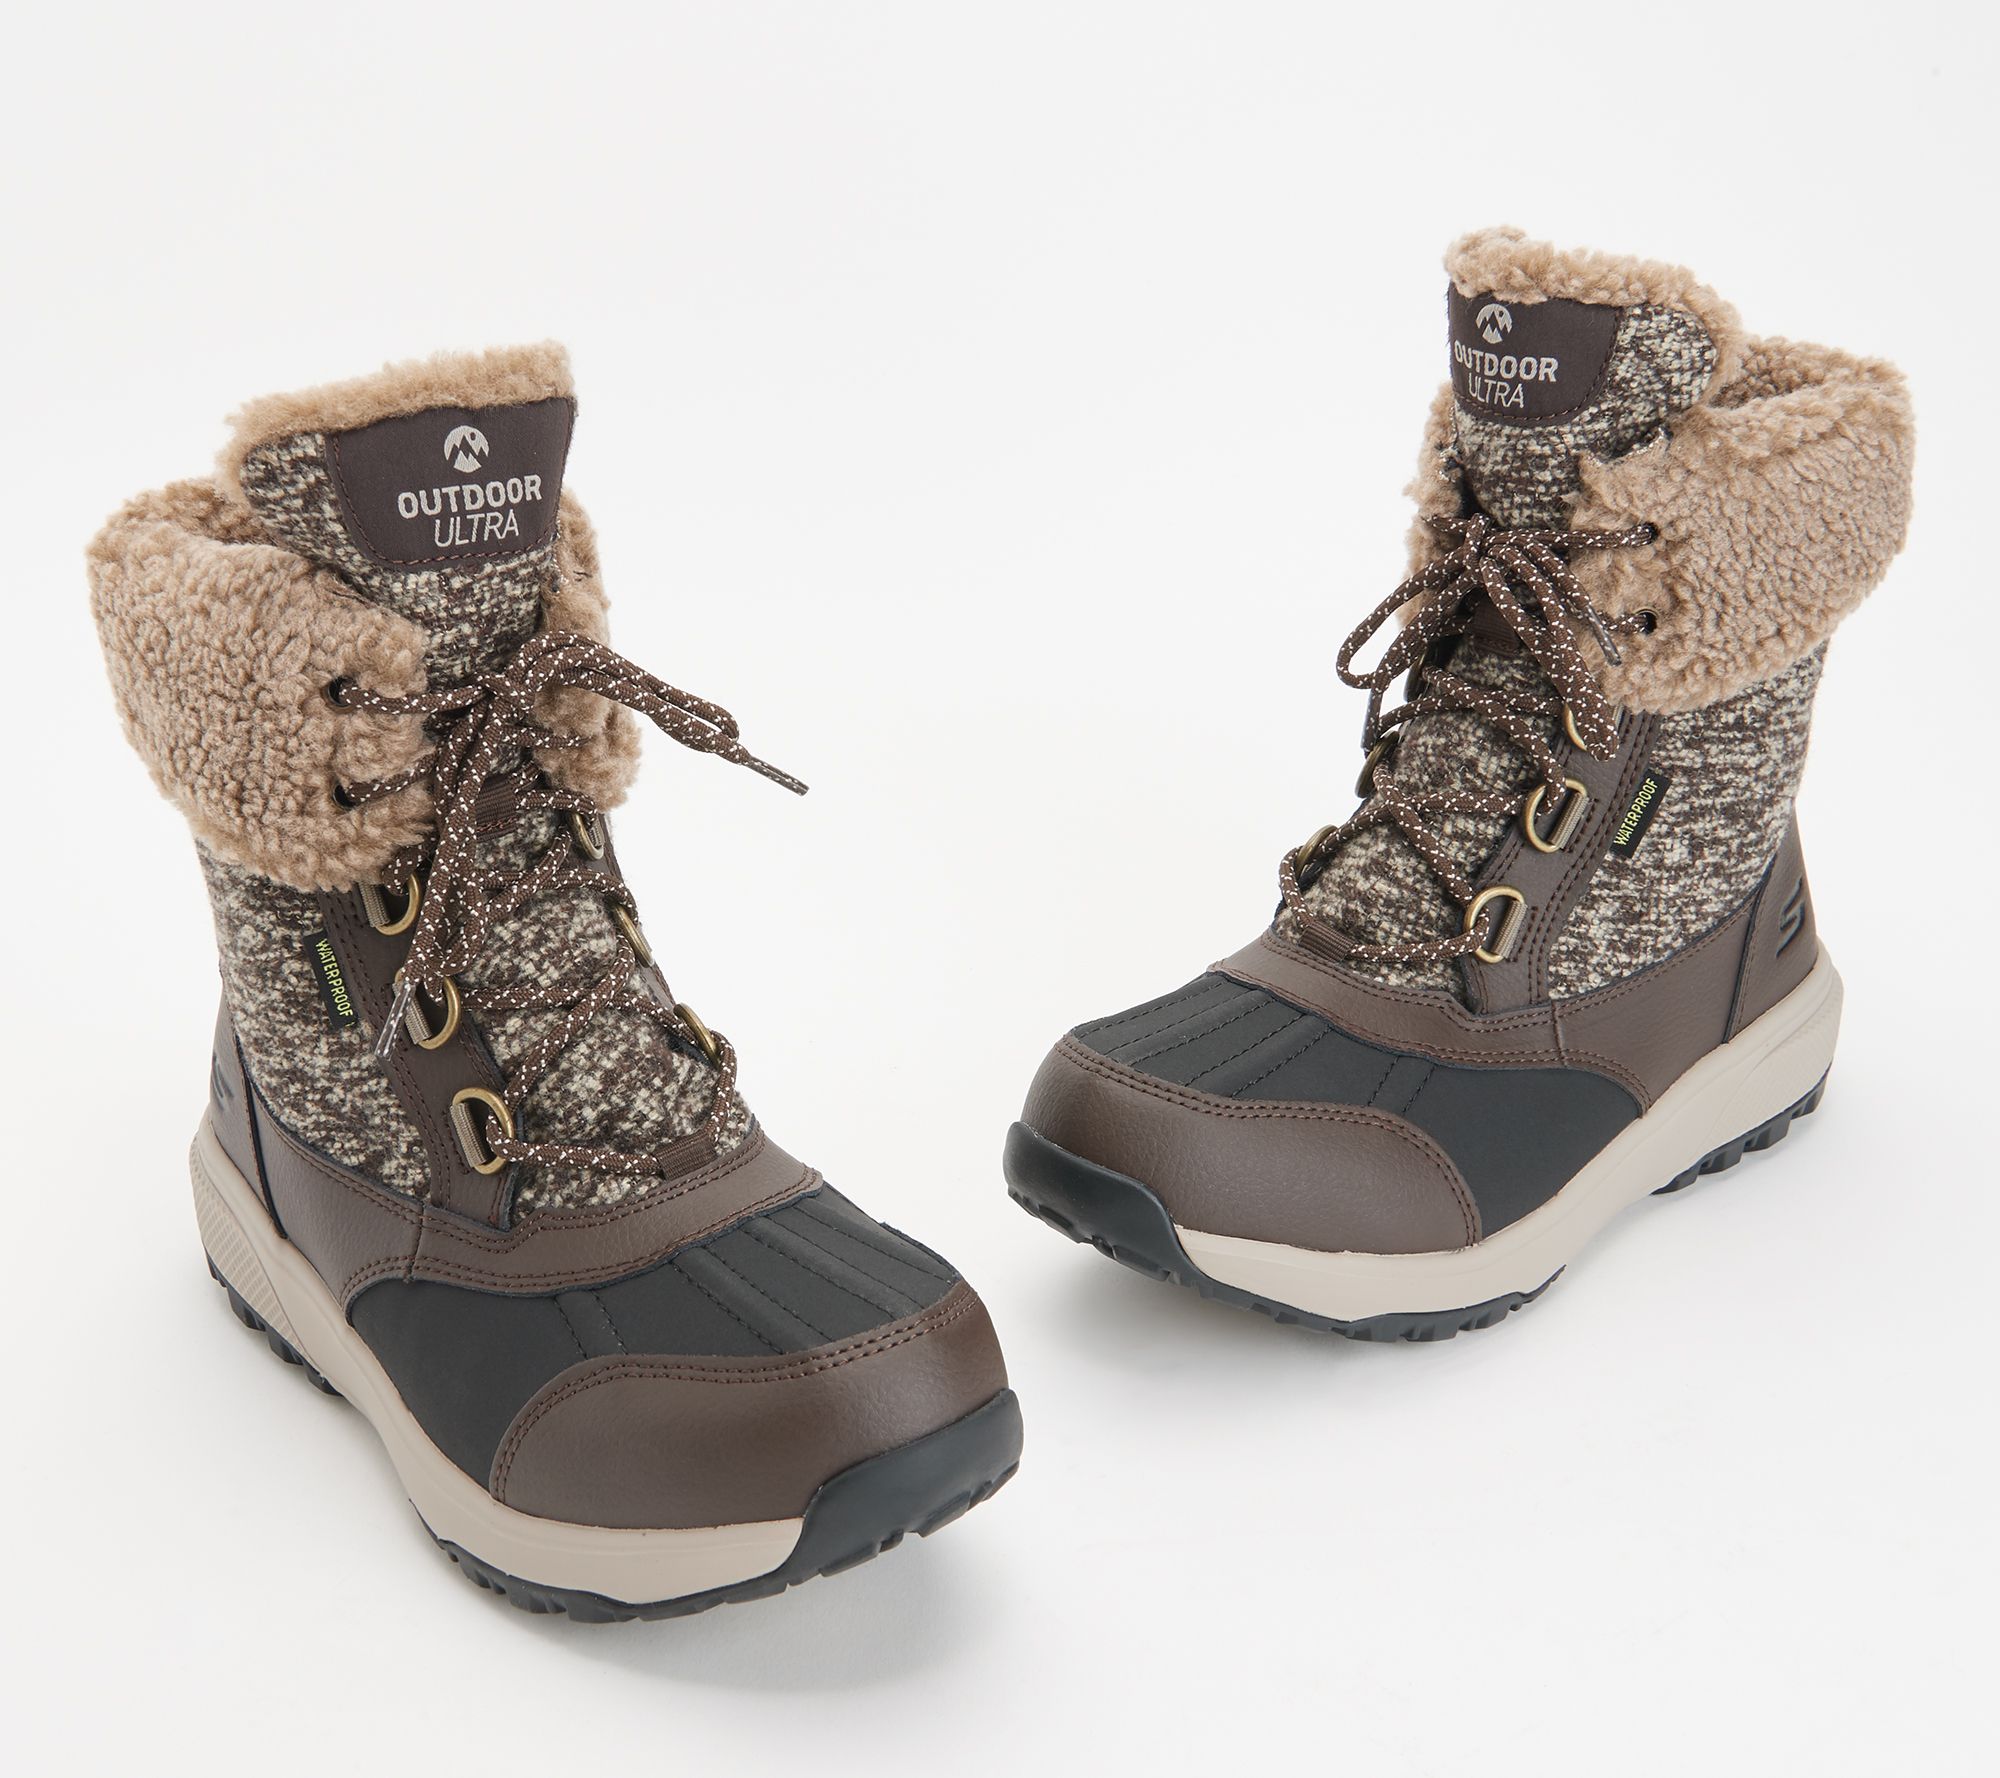 skechers boots at qvc